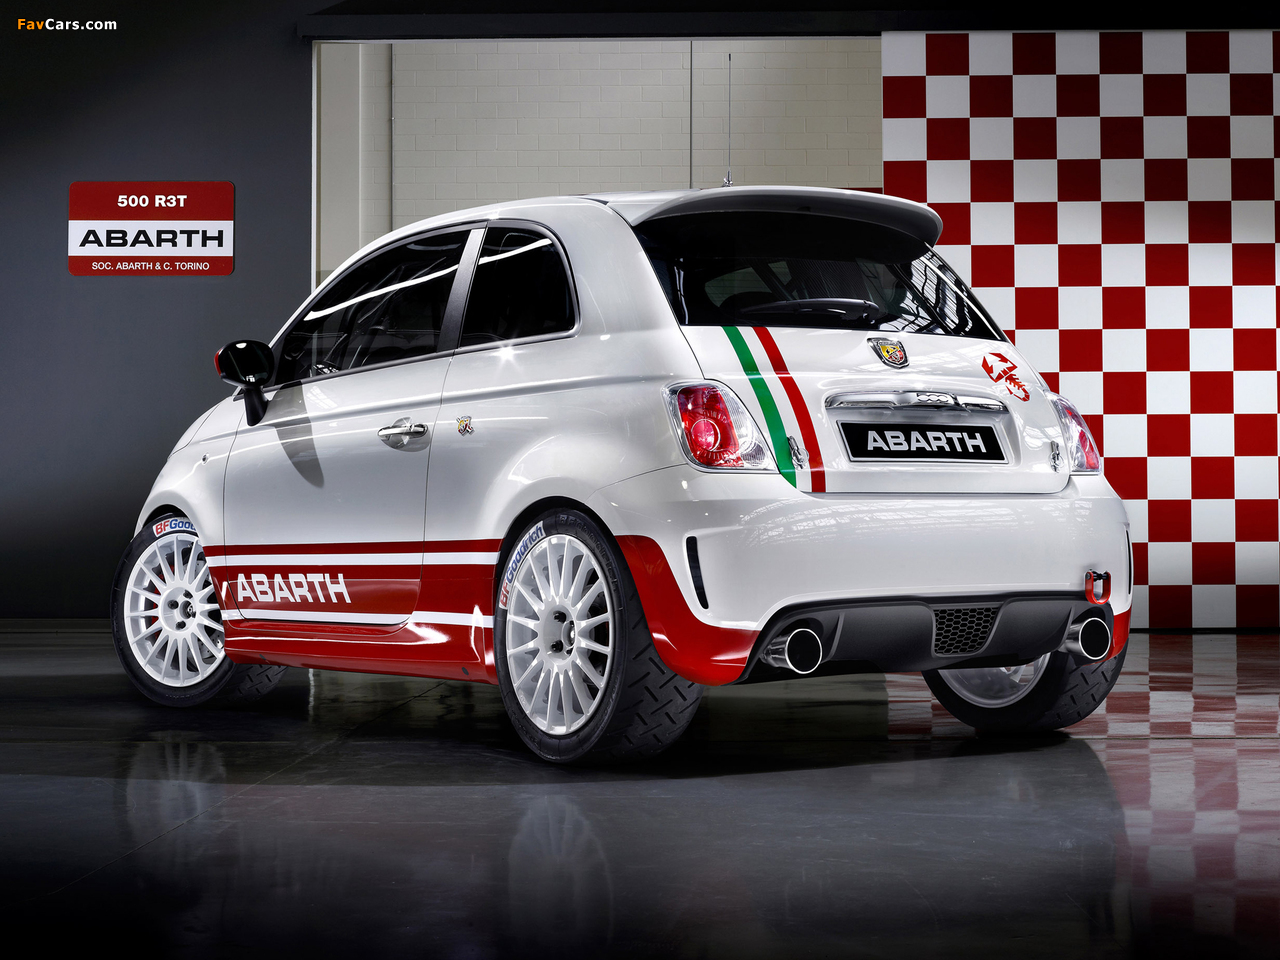 Abarth 500 R3T (2009) images (1280 x 960)